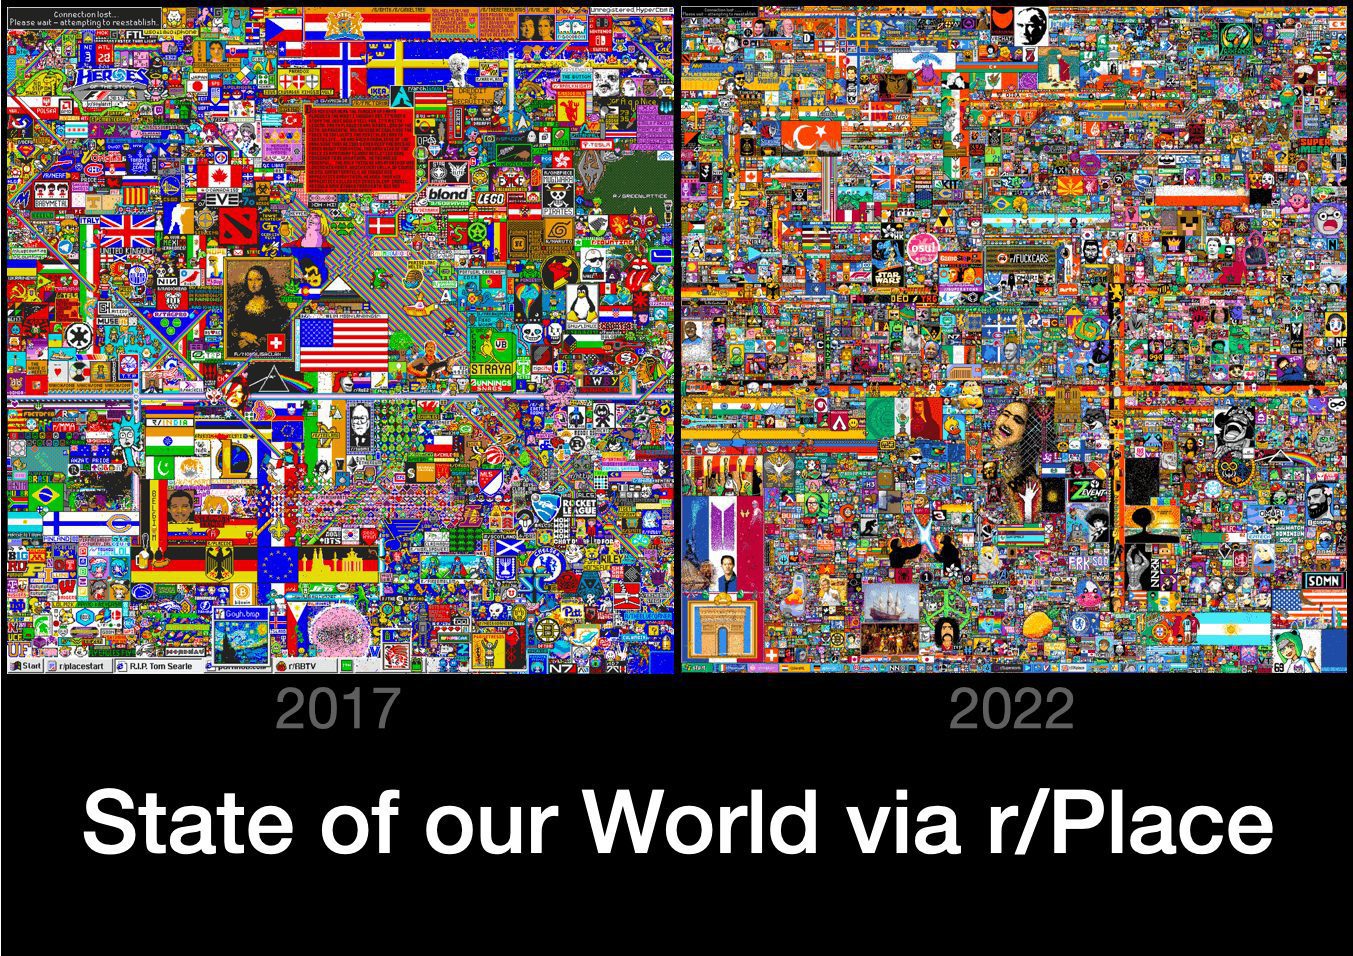 How Reddit’s r/Place reflects the State of Play of our World Today